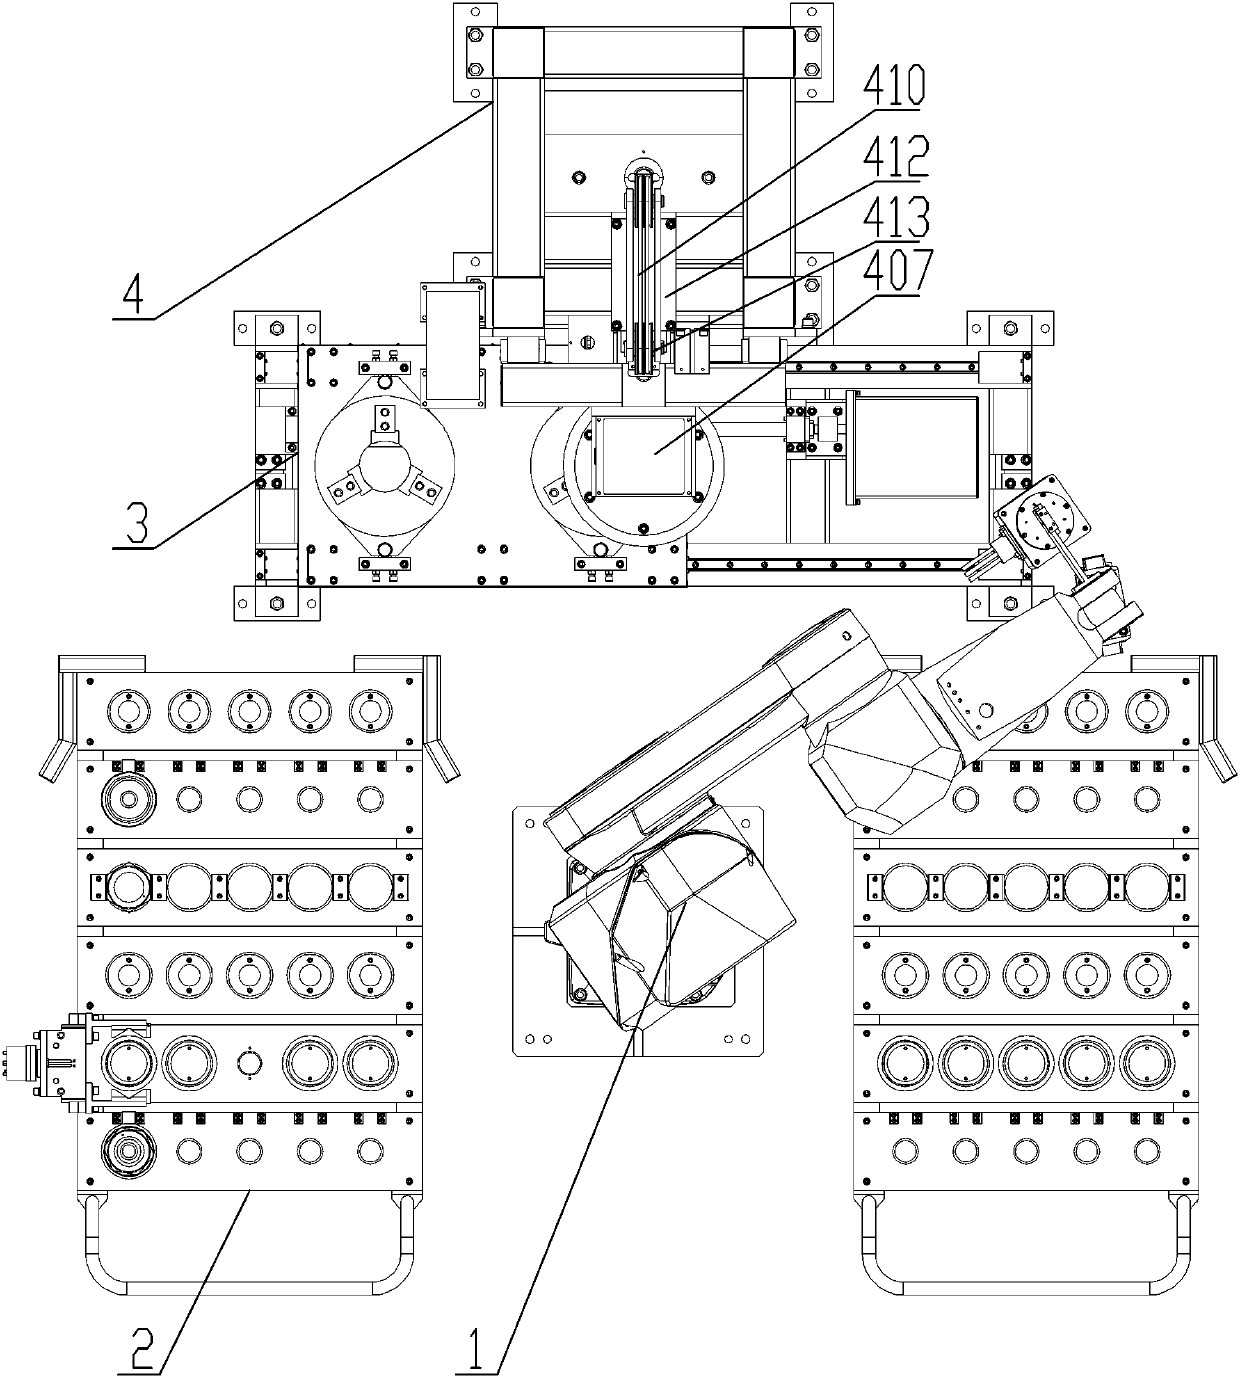 Automatic assembling system for standard test motor and assembling method